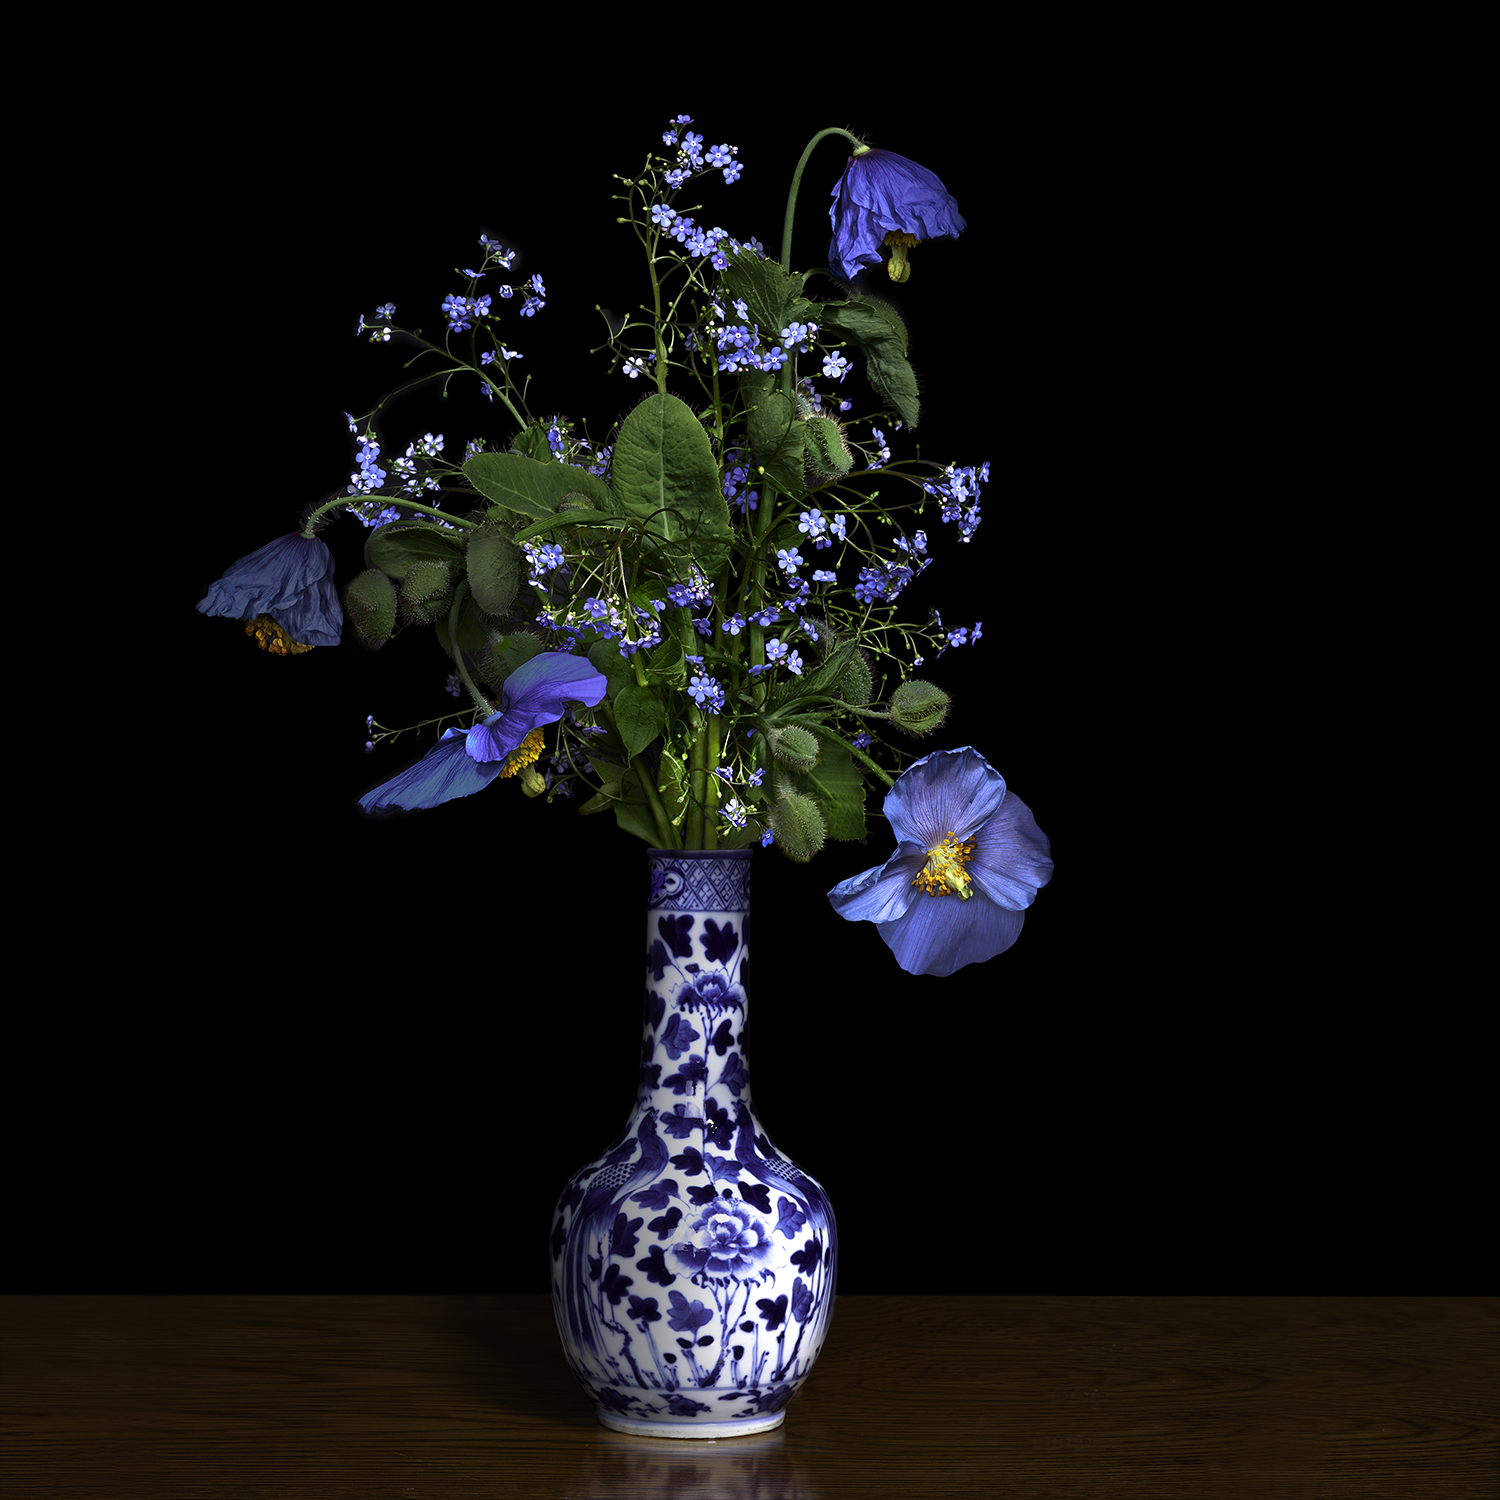 Image: T.M. Glass, Blue Poppy in a Blue and White Chinese Vase, 2018, archival pigment ink on archival cotton rag paper fused to